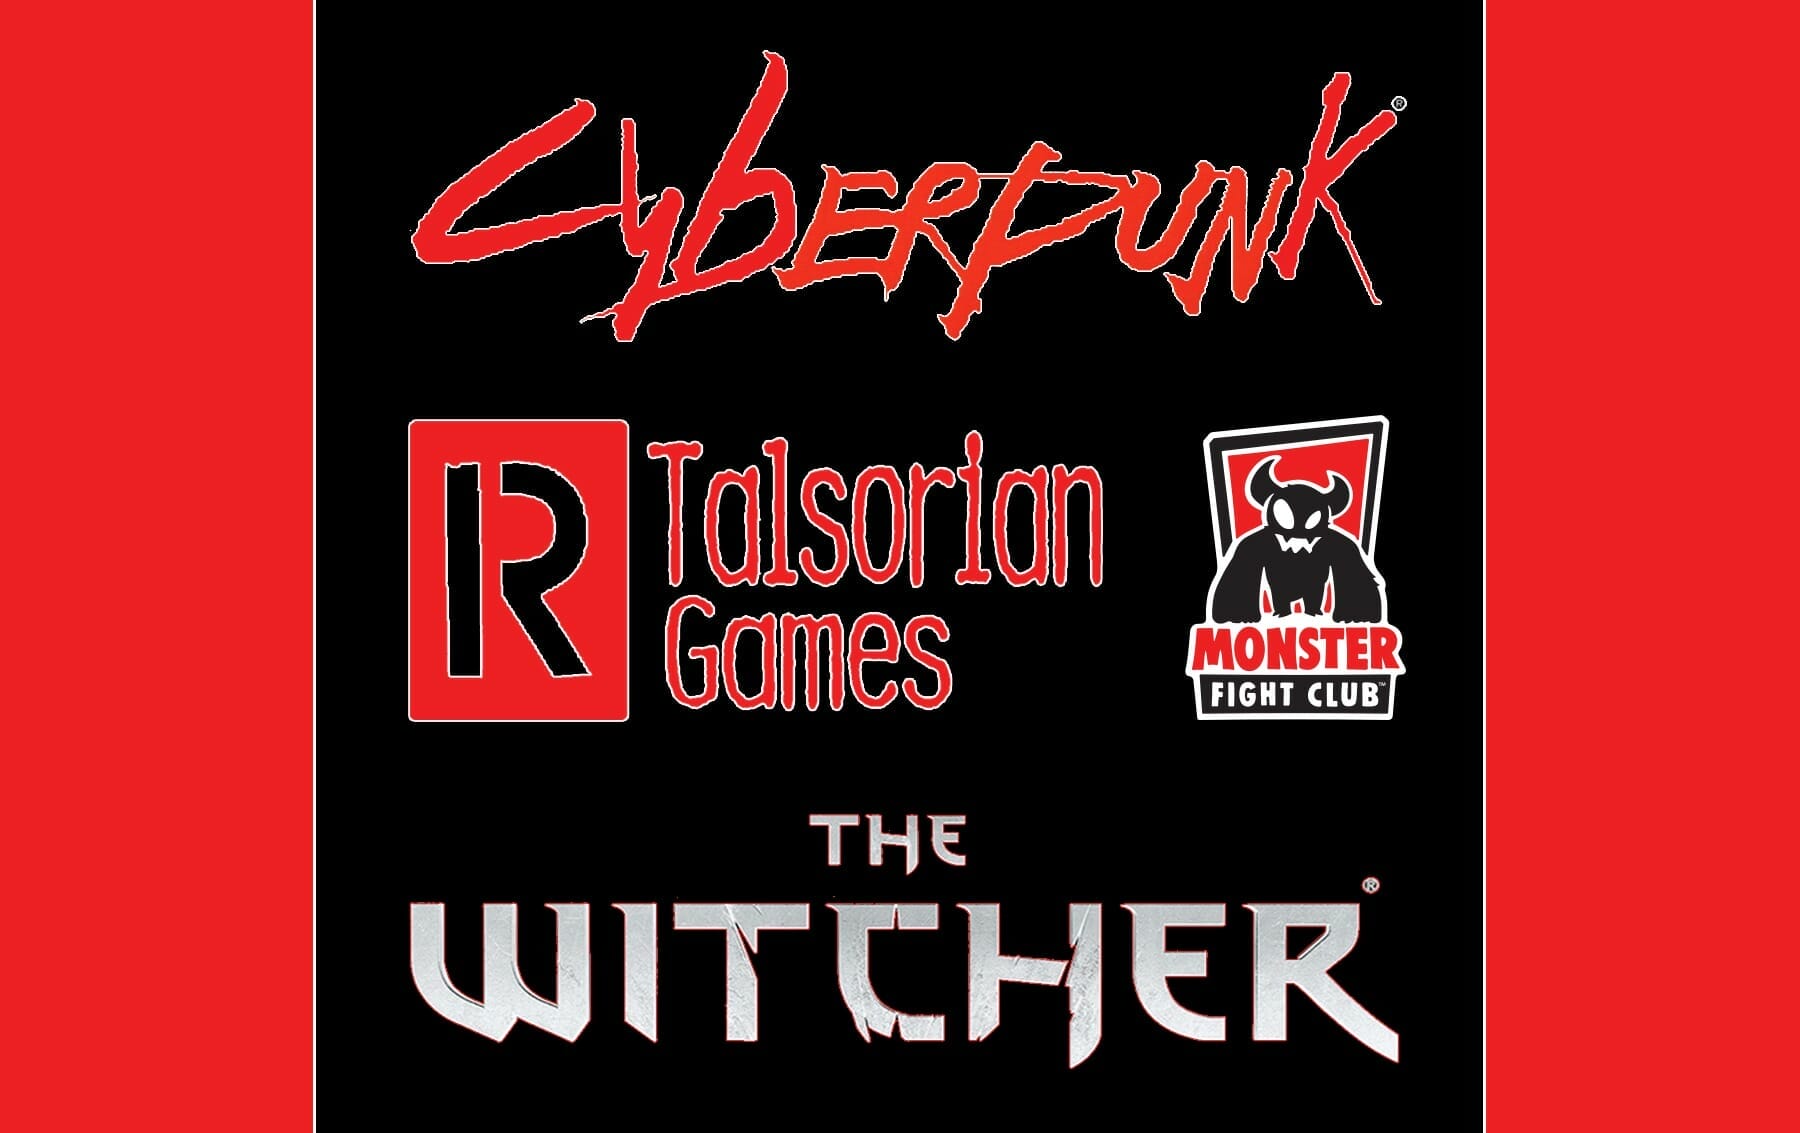 R Talsorian Games and Monster Fight Club